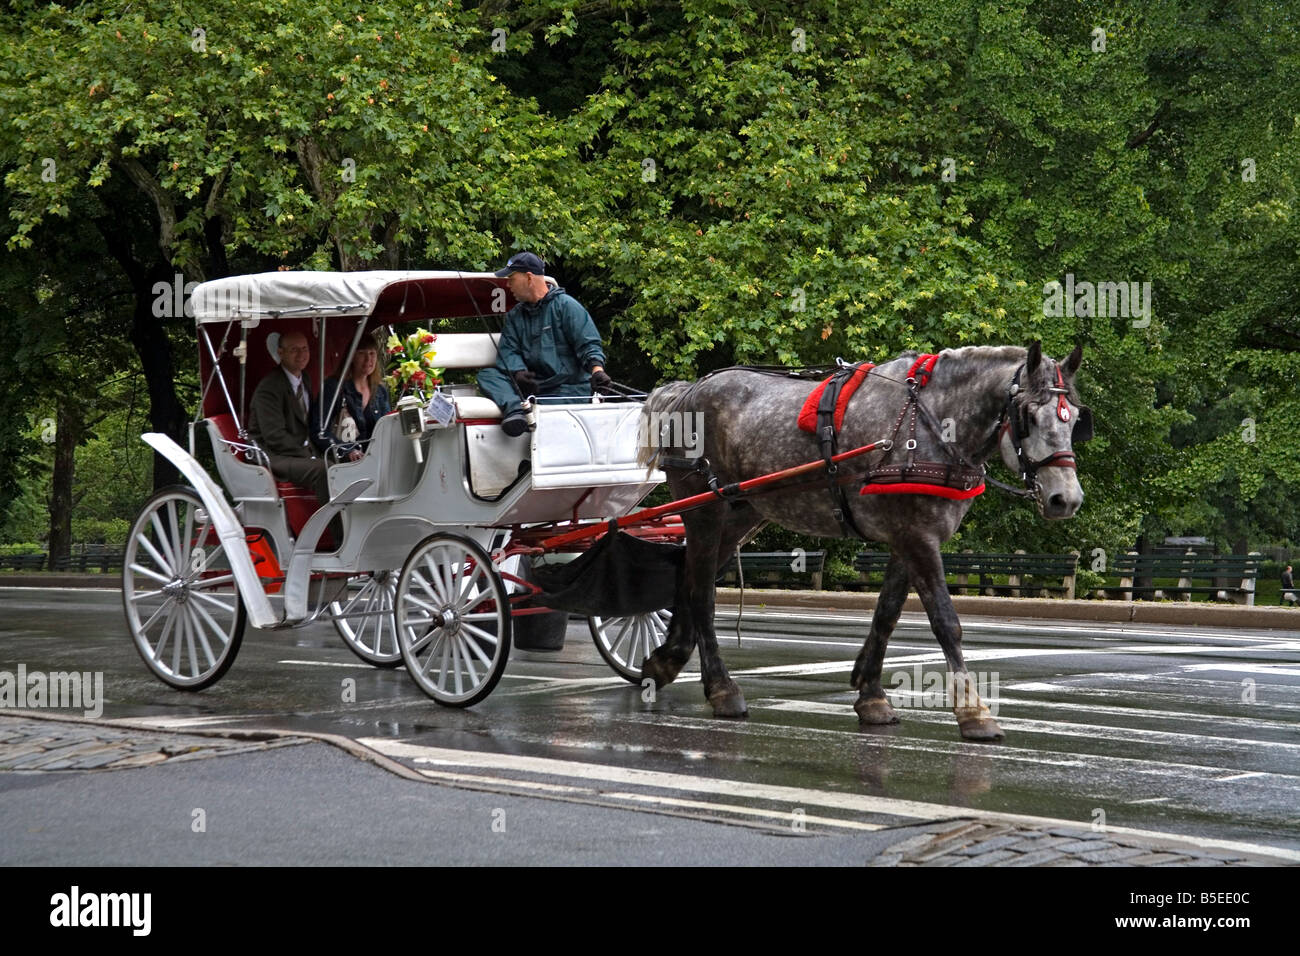 Horse carriage in Central Park, New York City, New York, USA, North America Stock Photo